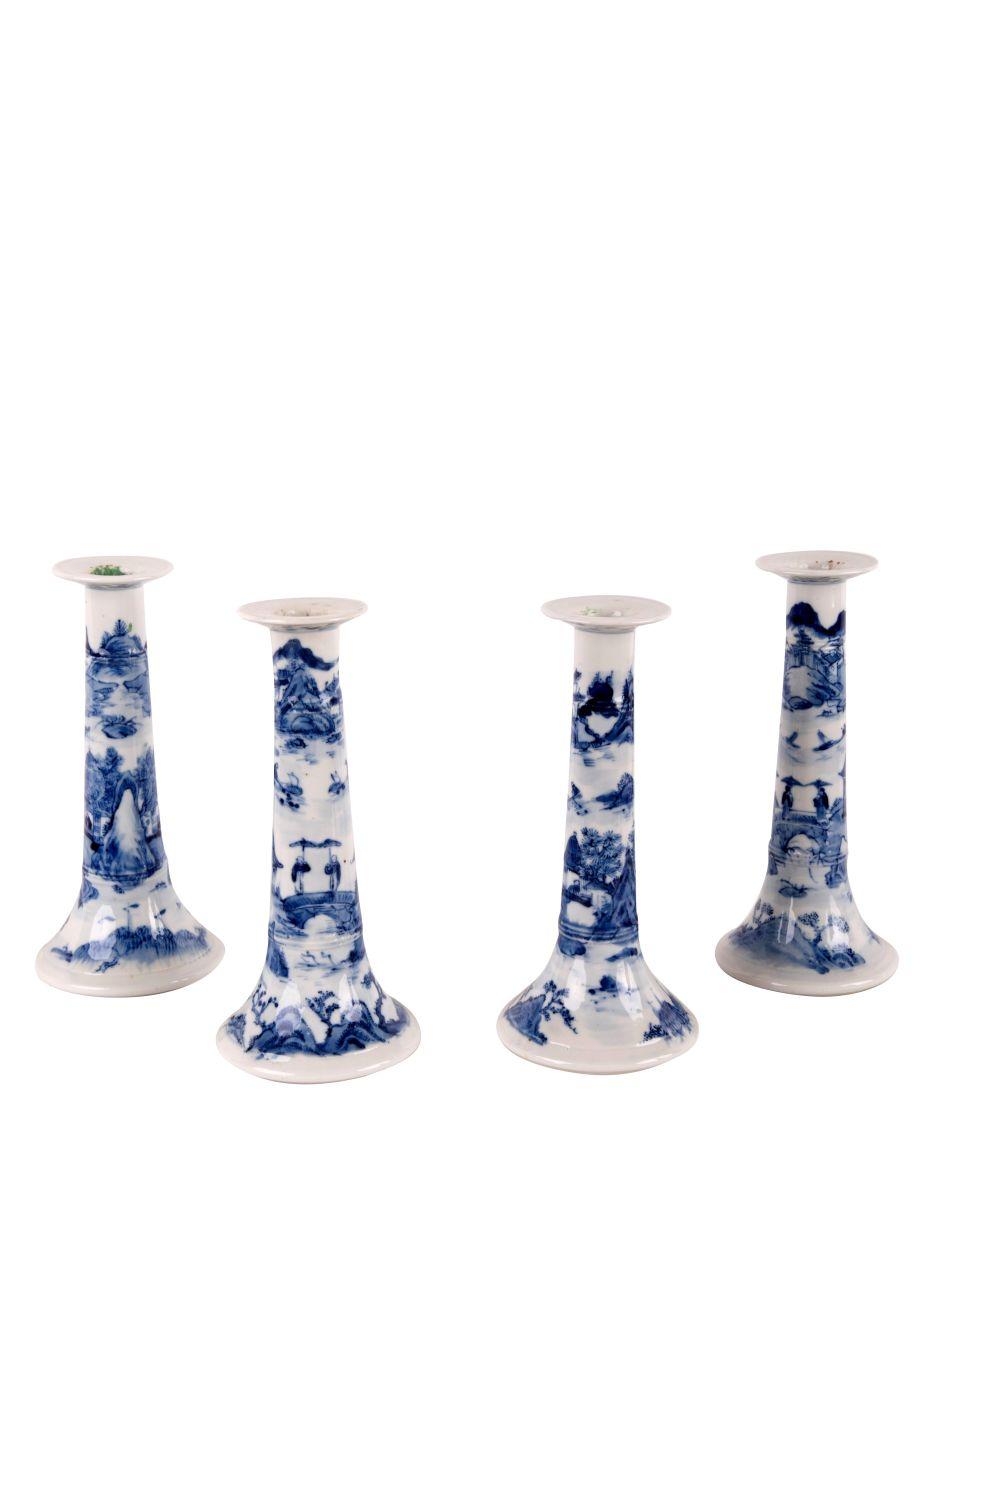 FOUR CHINESE BLUE & WHITE EXPORT